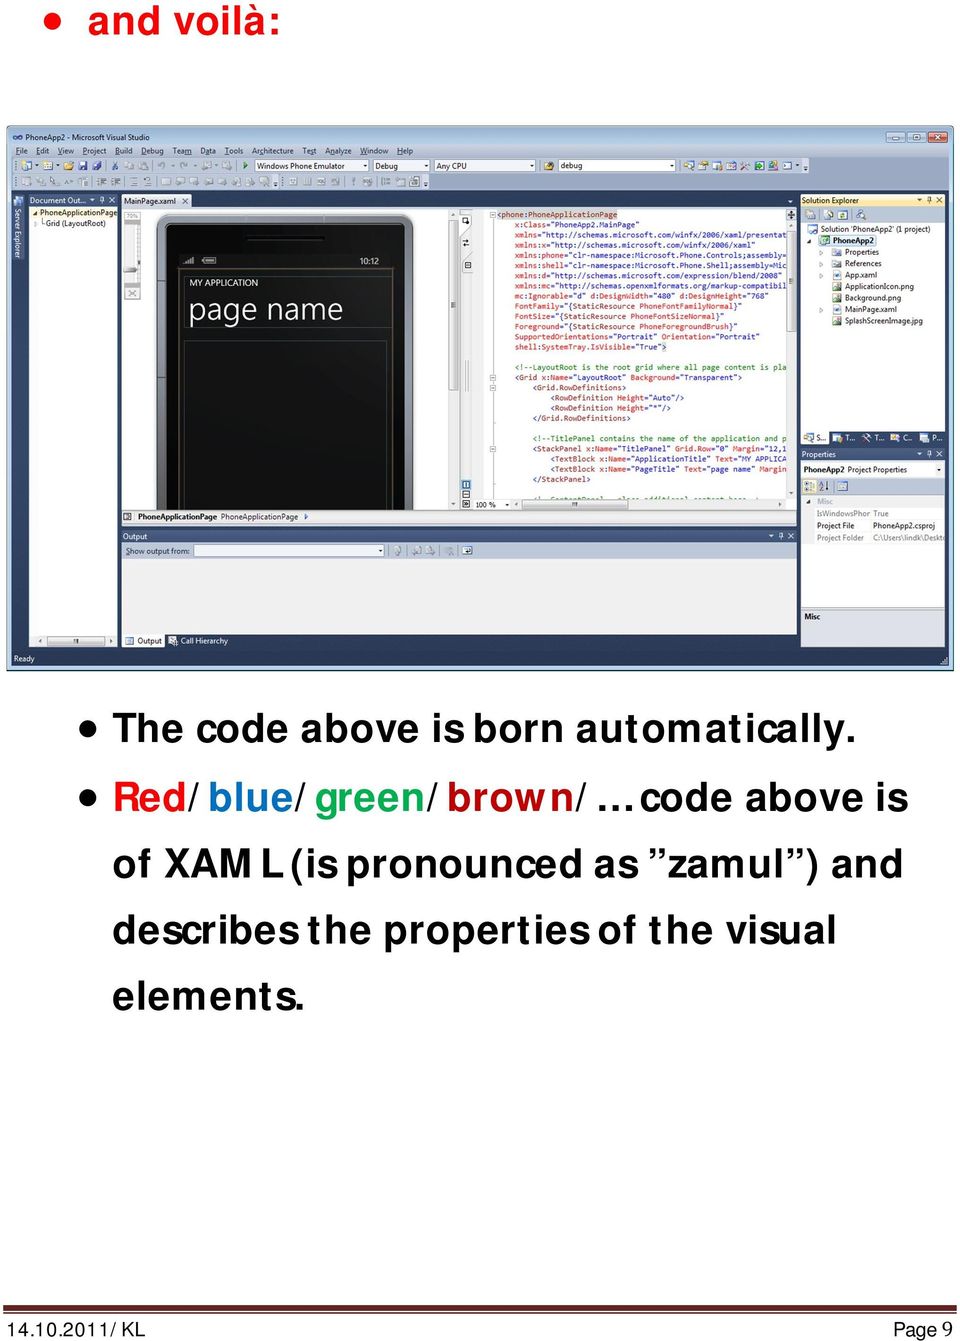 Red/blue/green/brown/ code above is of